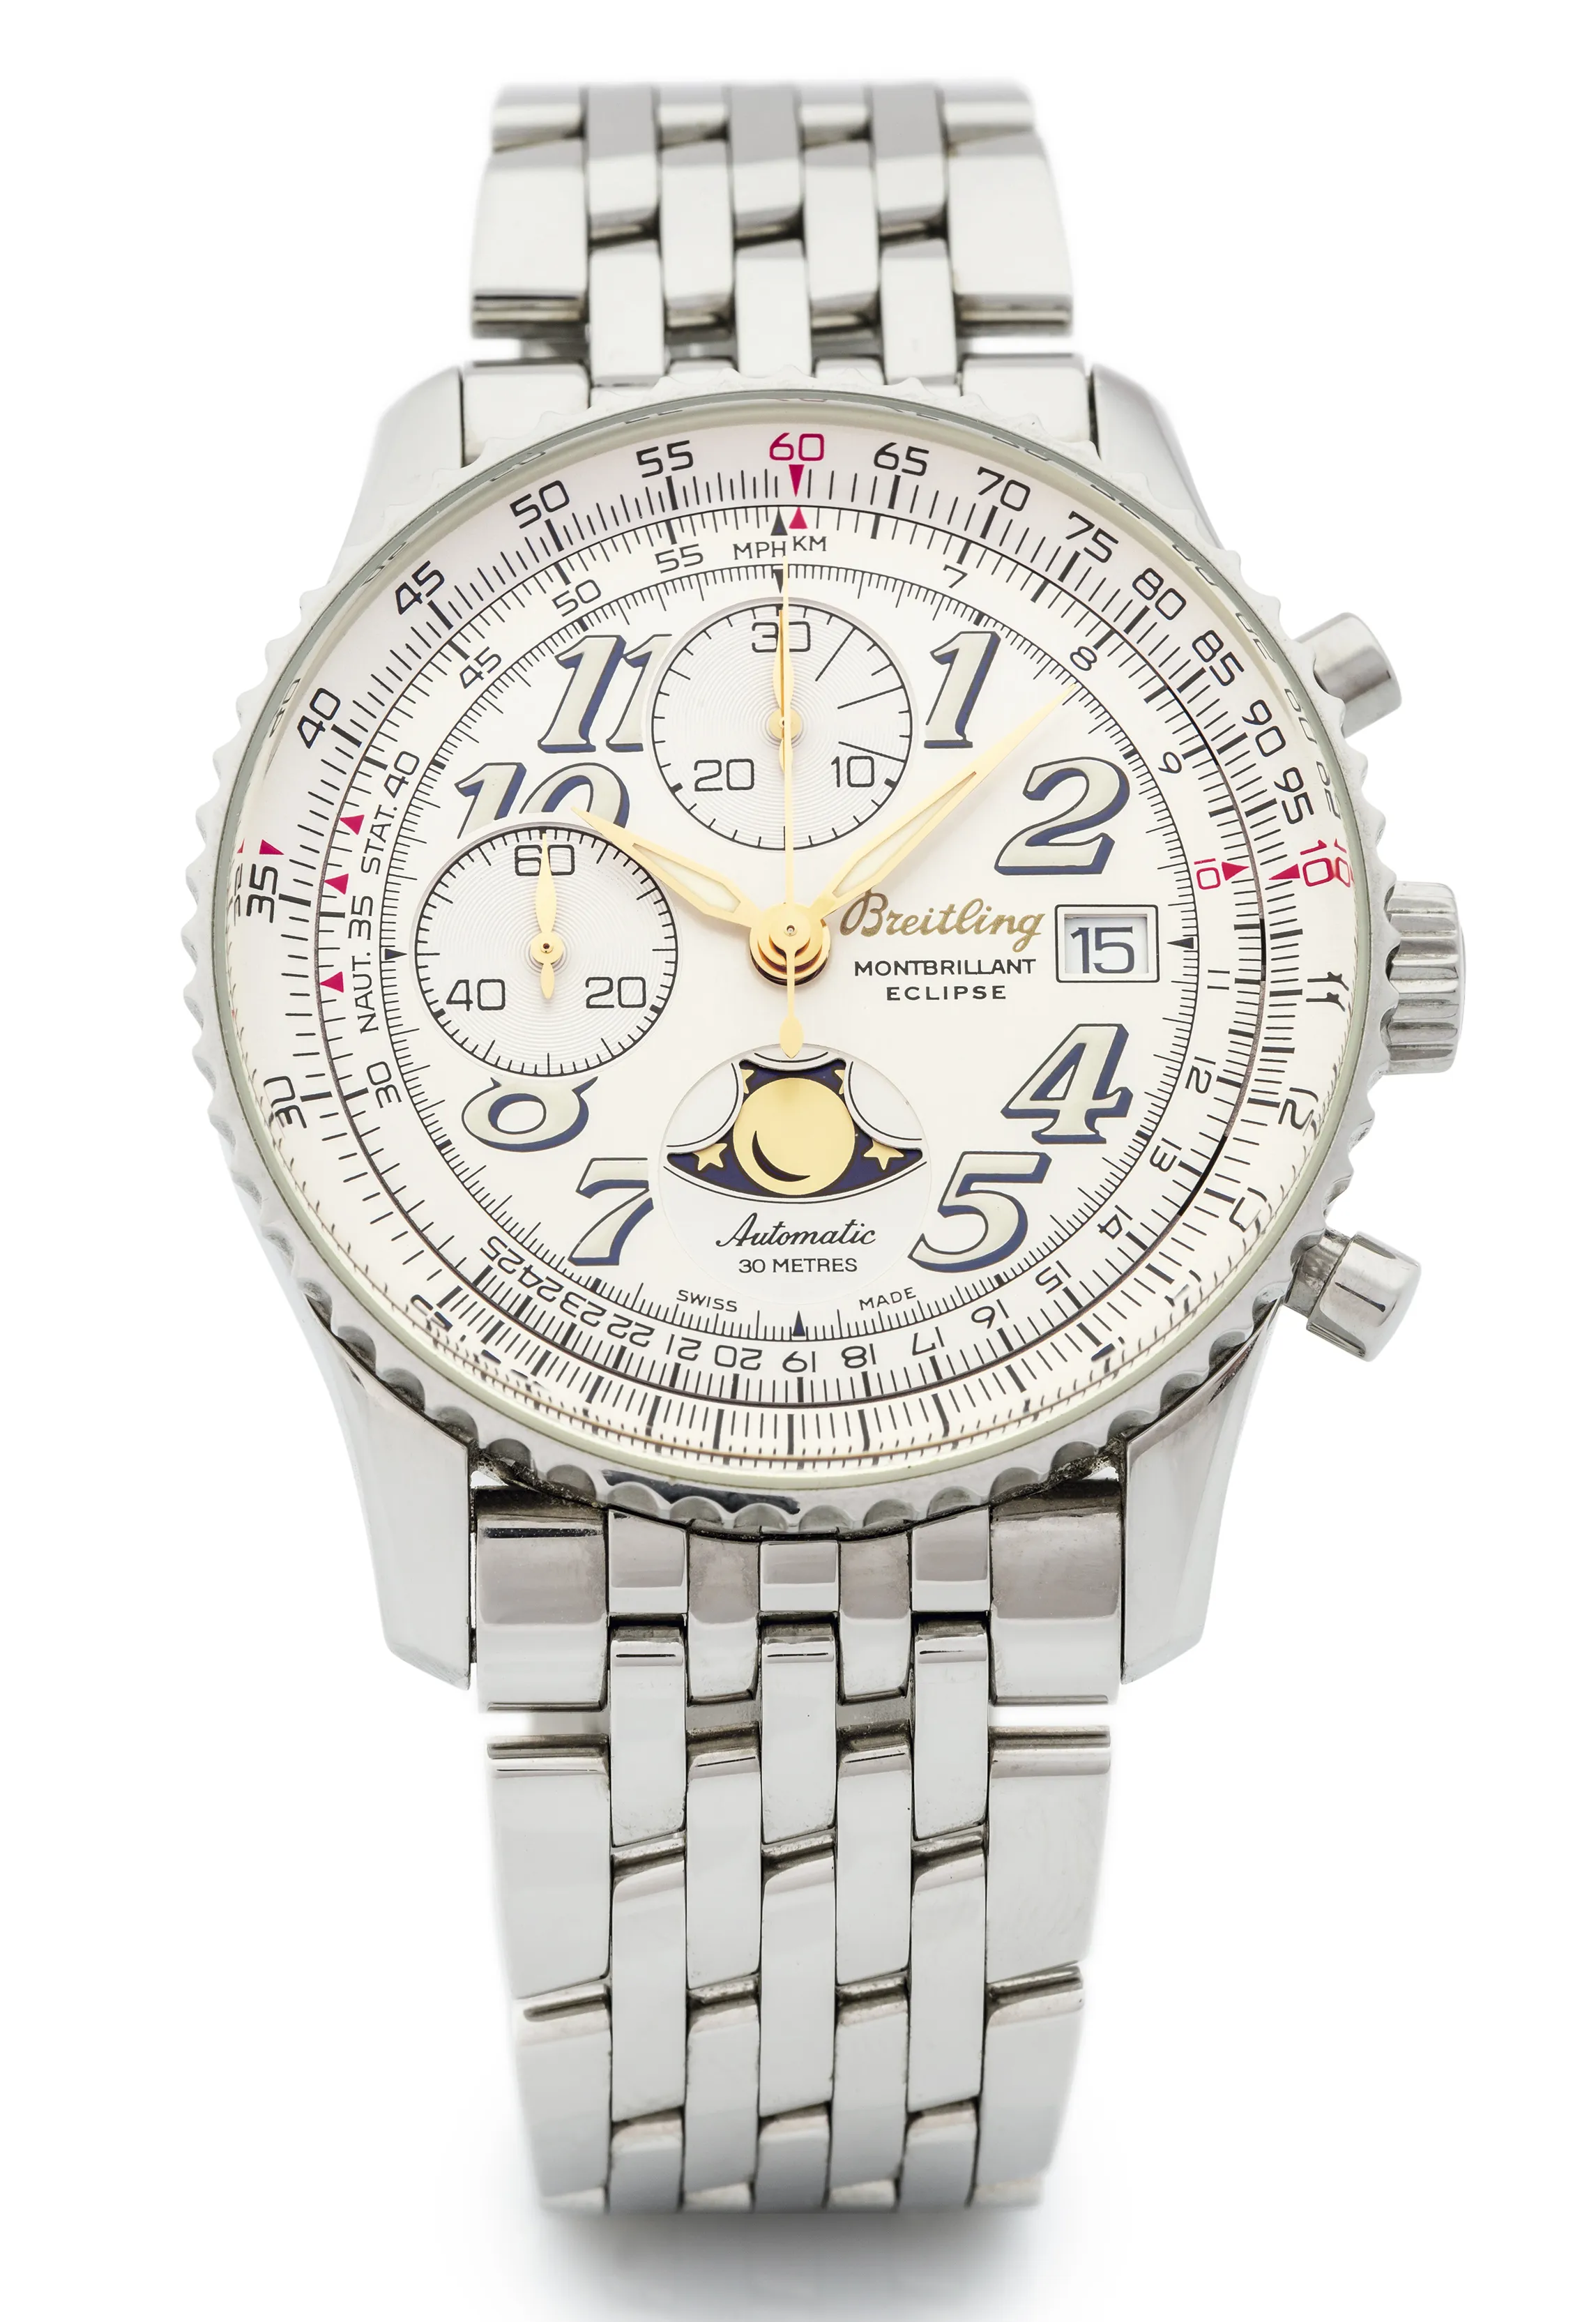 Breitling Montbrillant A43030 41mm Stainless steel Silver